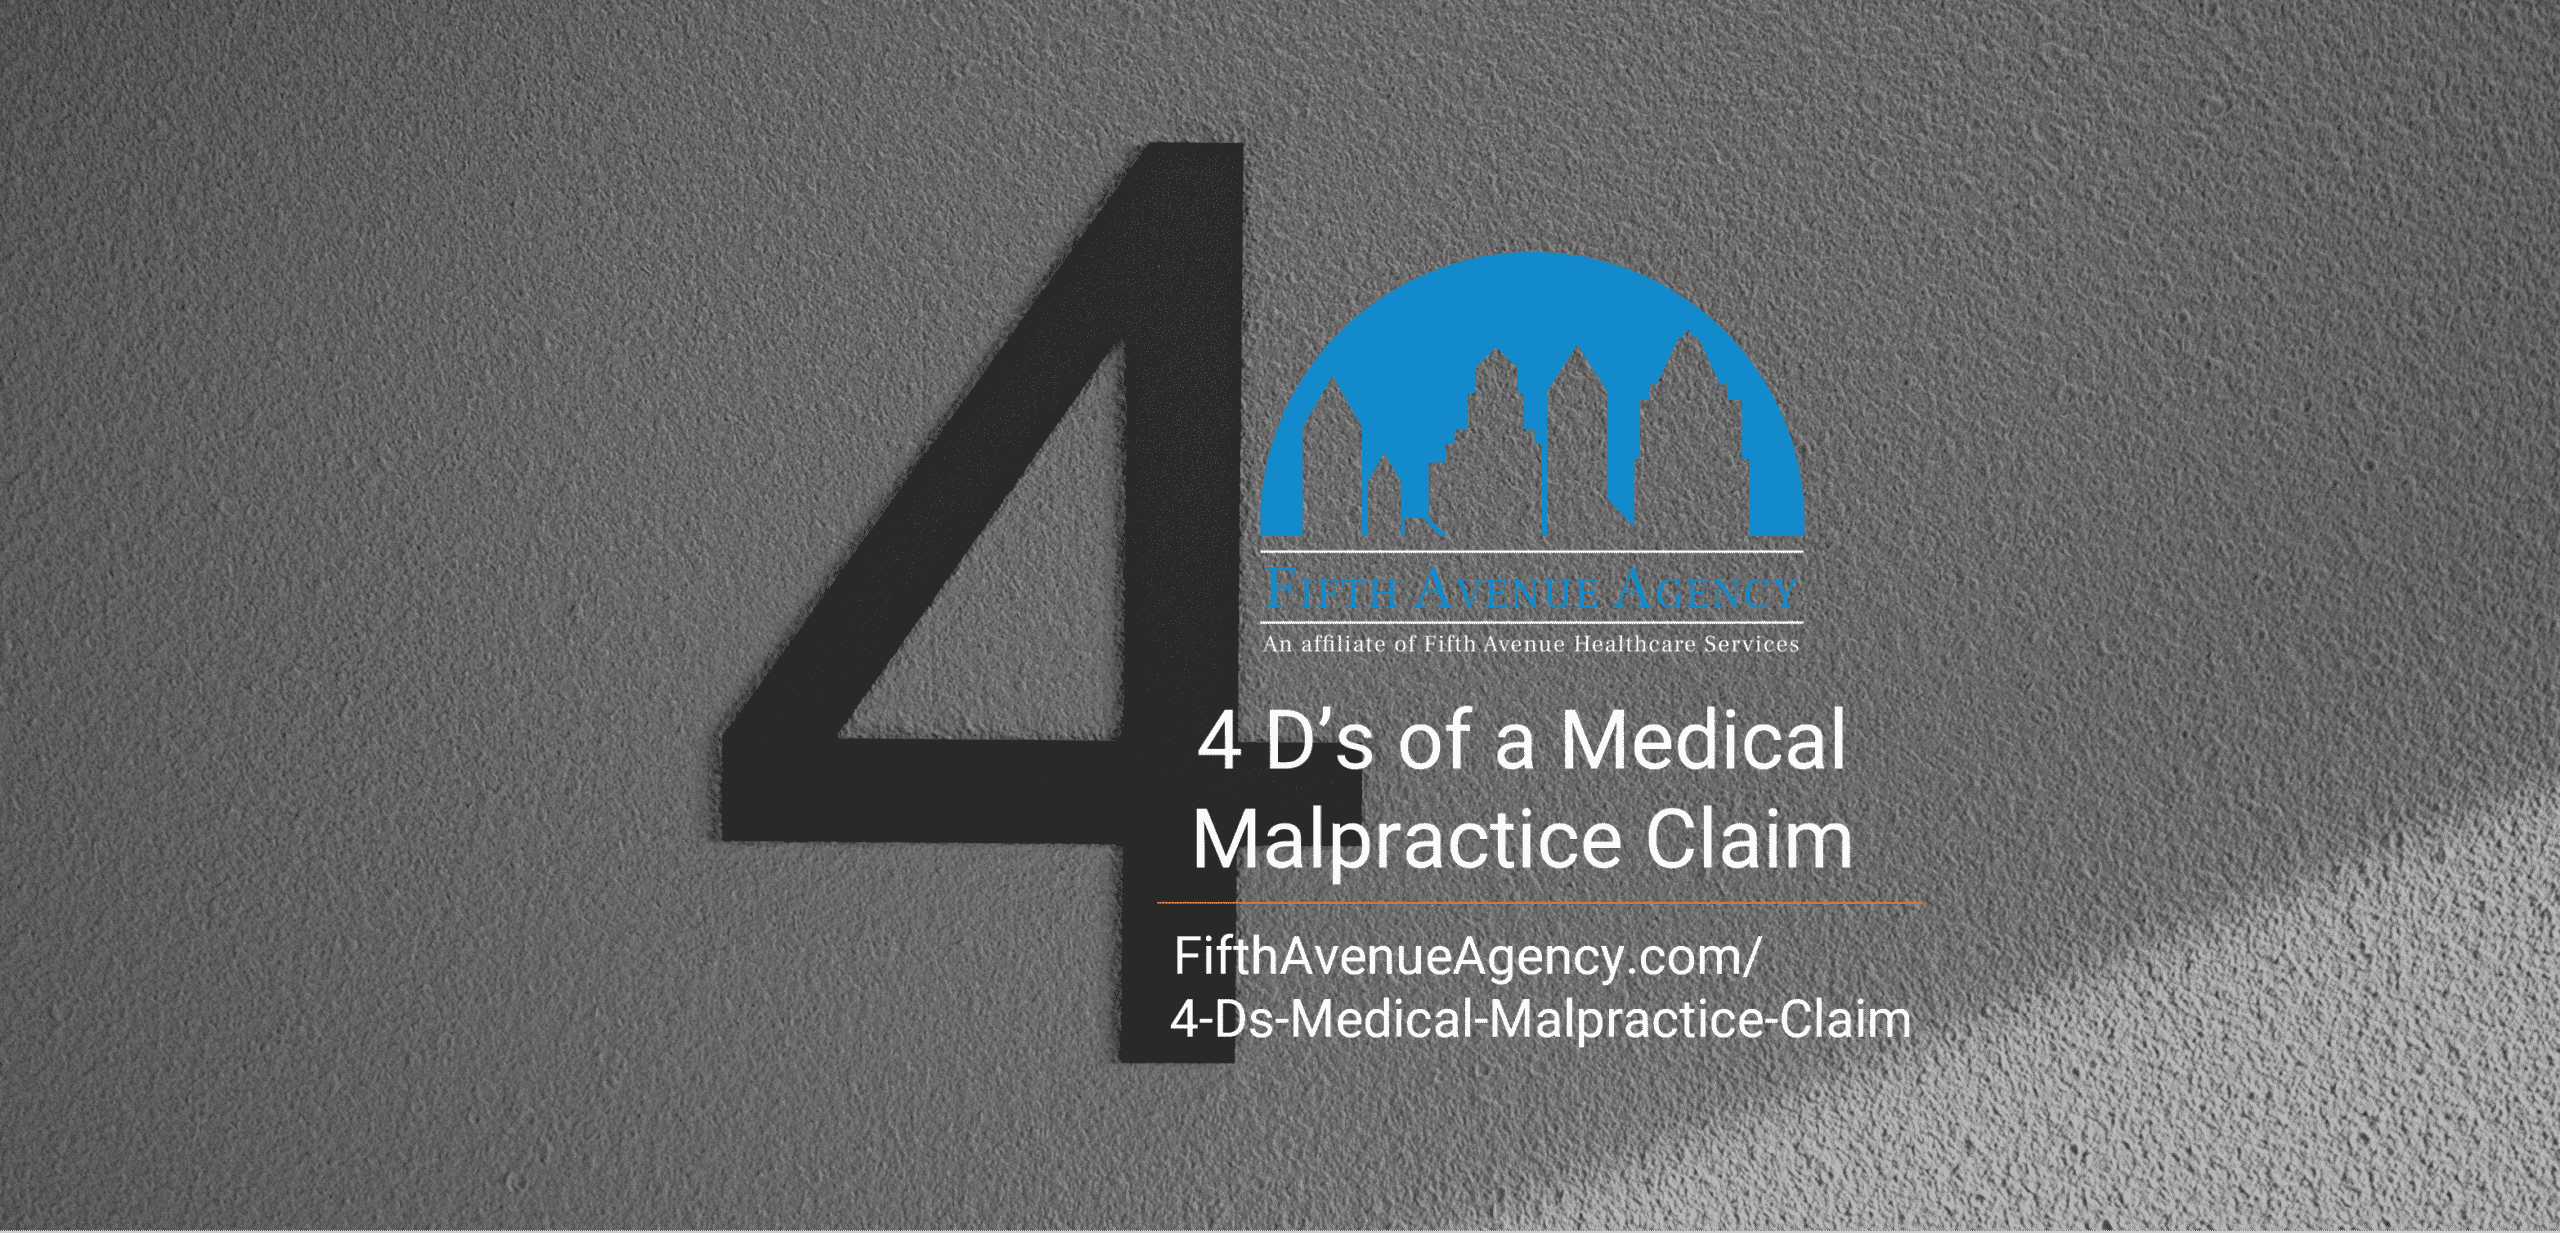 4 Ds Of A Medical Malpractice Claim Fifthavenueagency.com